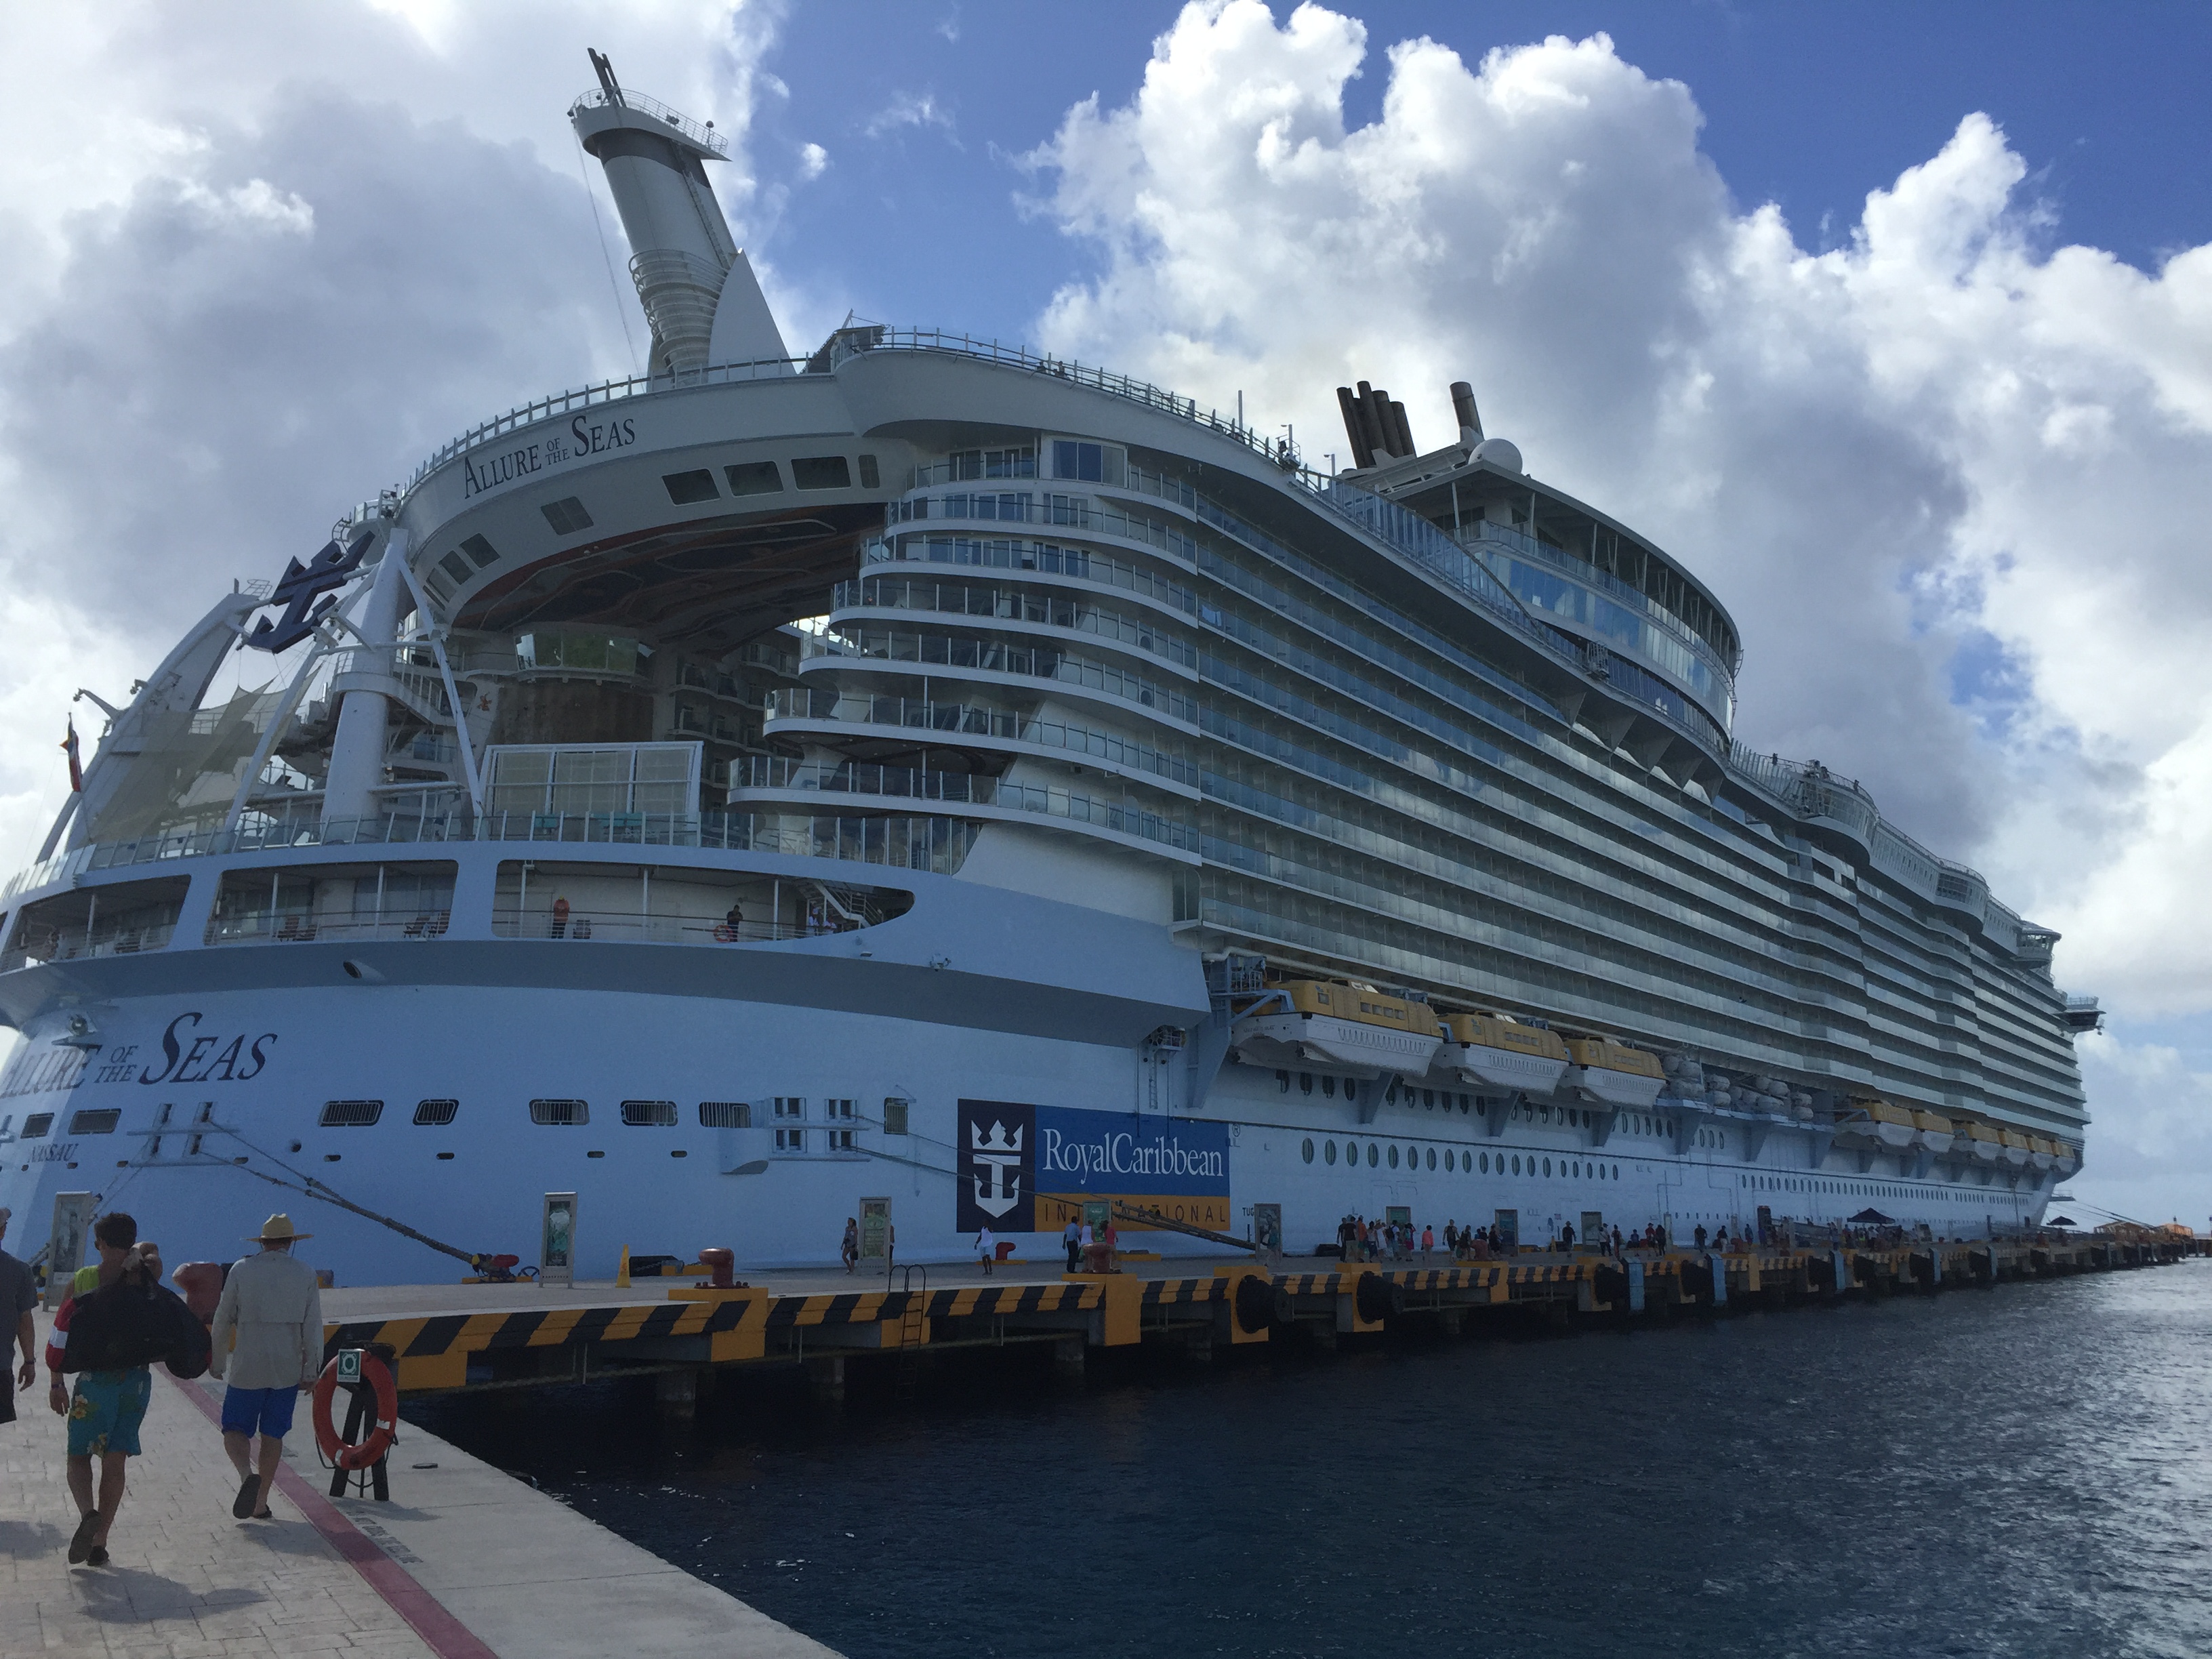 Royal Caribbean's Allure Of The Seas Makes Overhaul Stop At